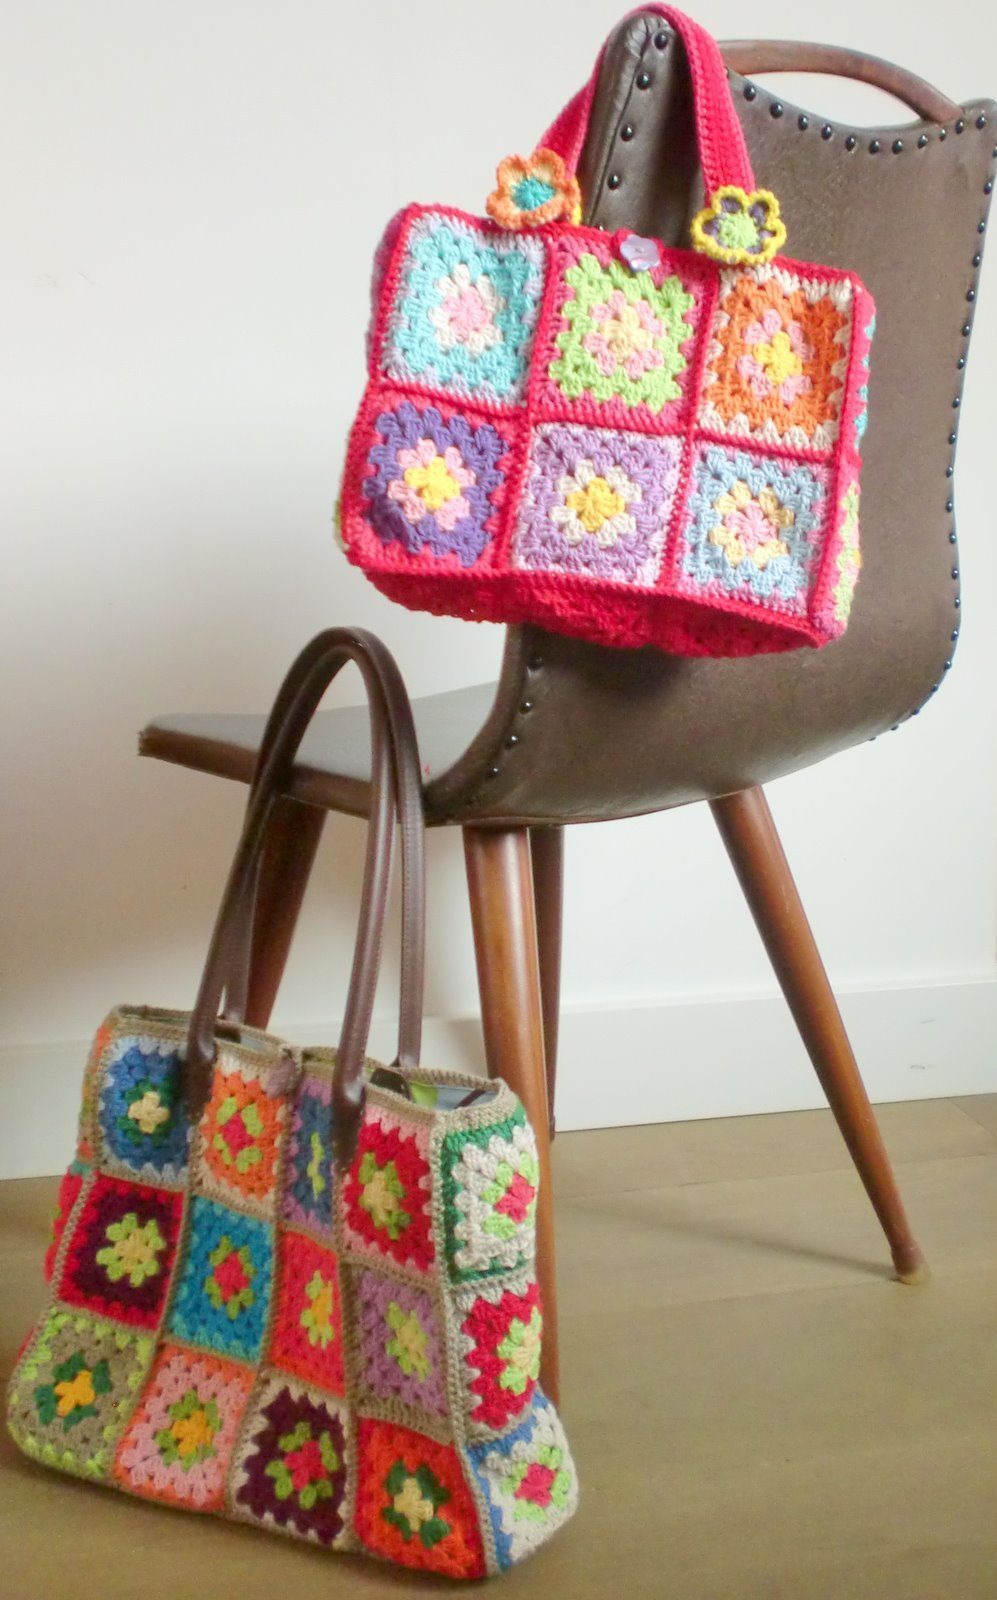 Cool handbags with granny squares